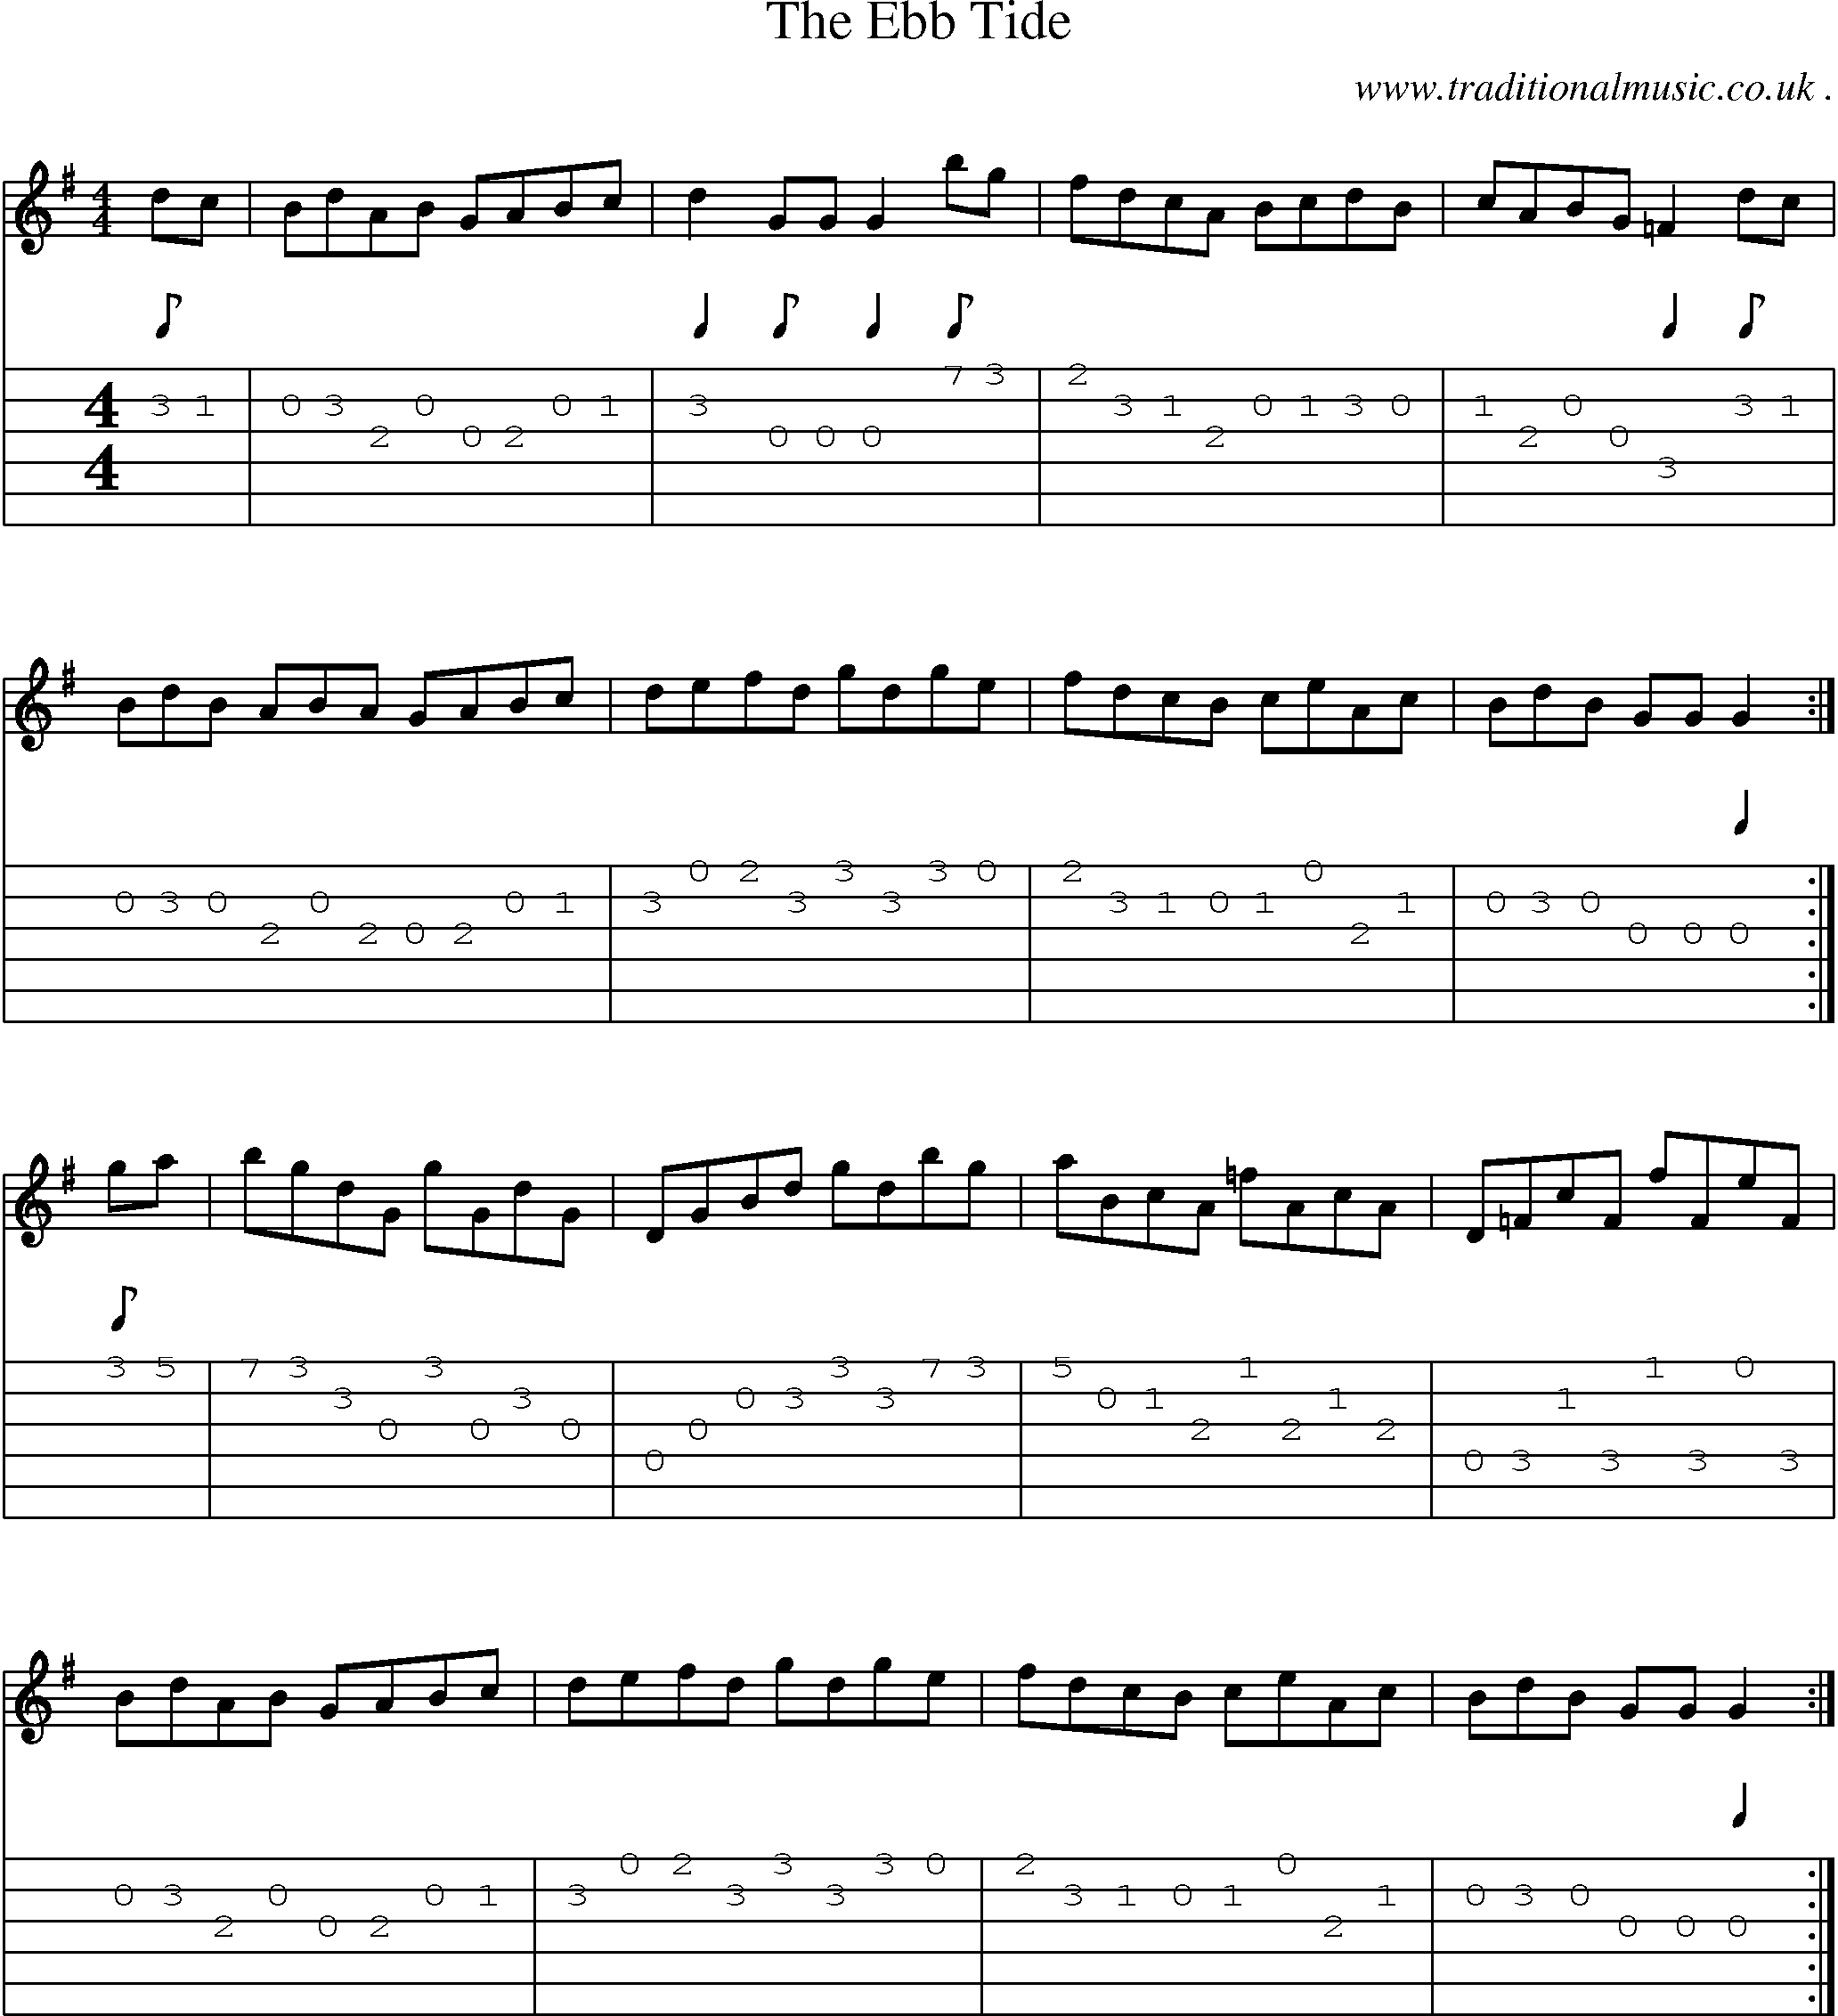 Sheet-Music and Guitar Tabs for The Ebb Tide